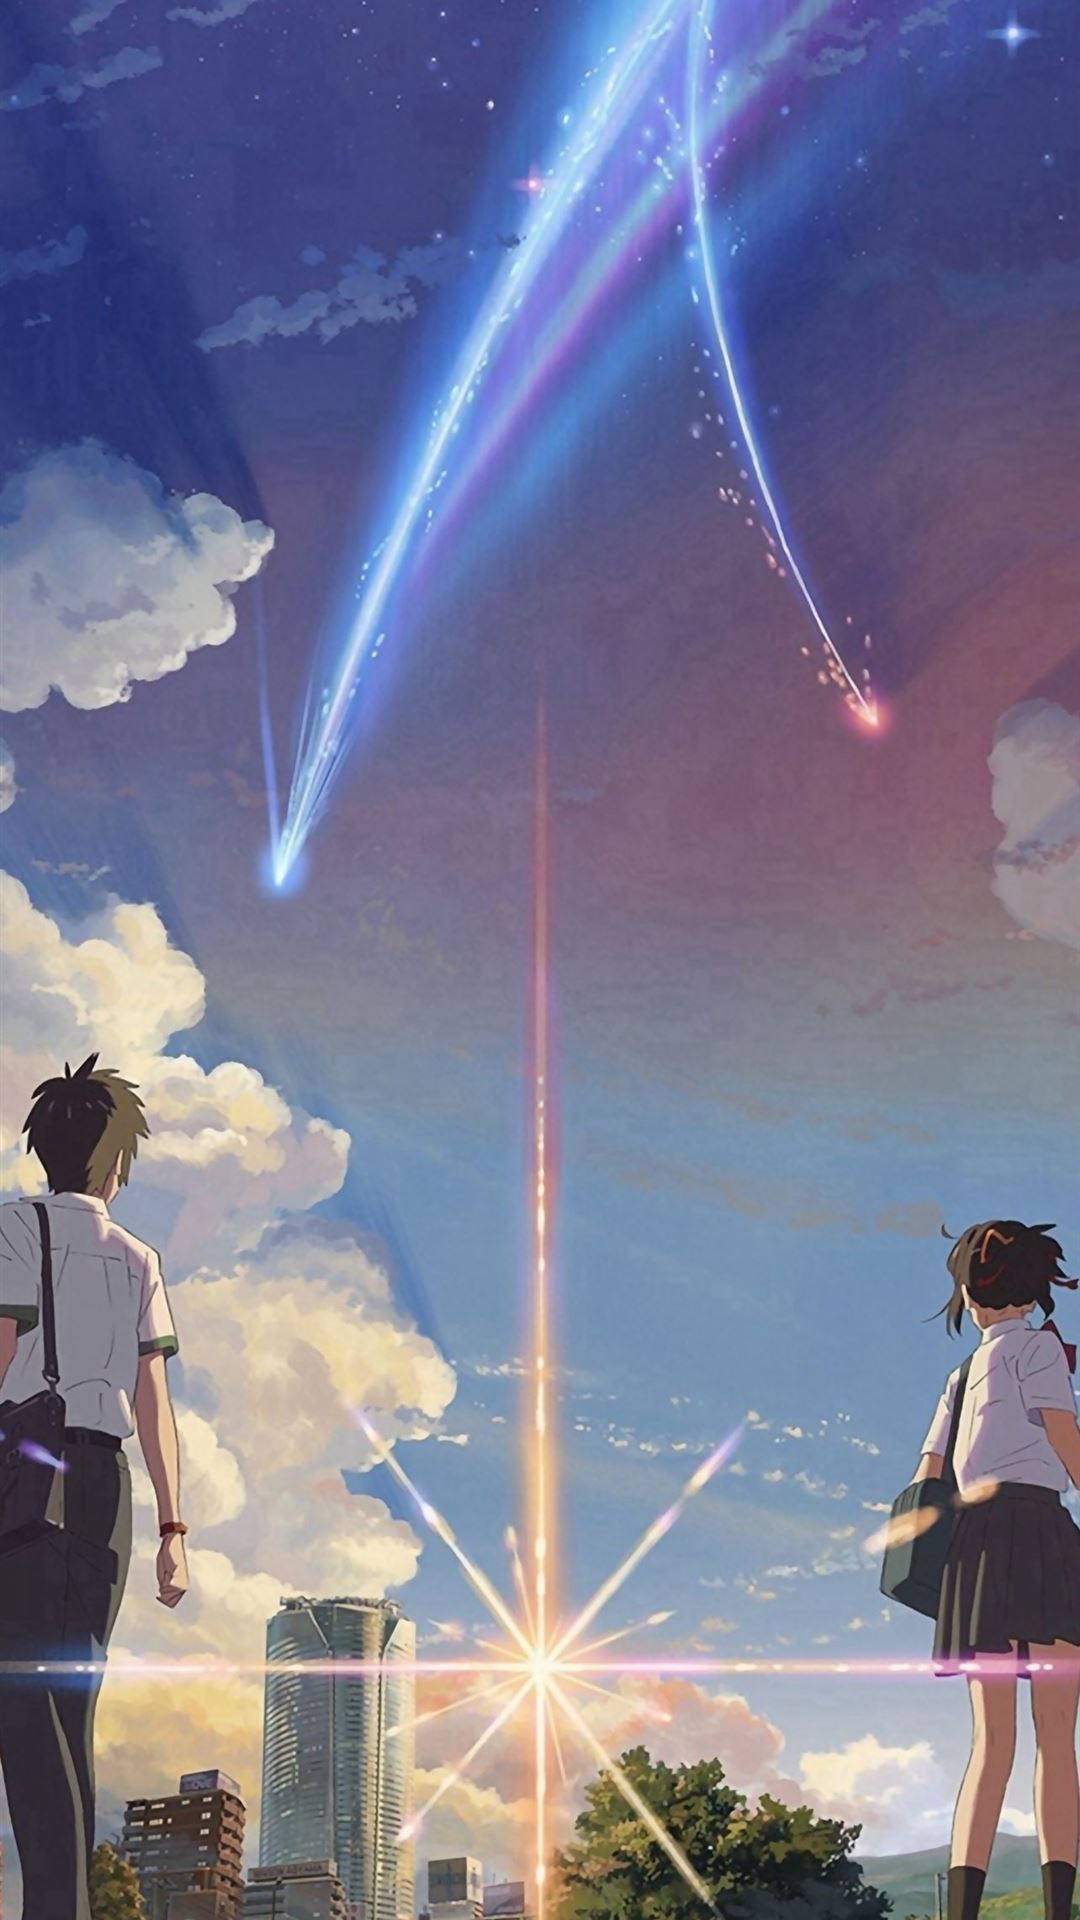 Anime Film Yourname Sky Illustration Art iPhone Wallpapers Free Download